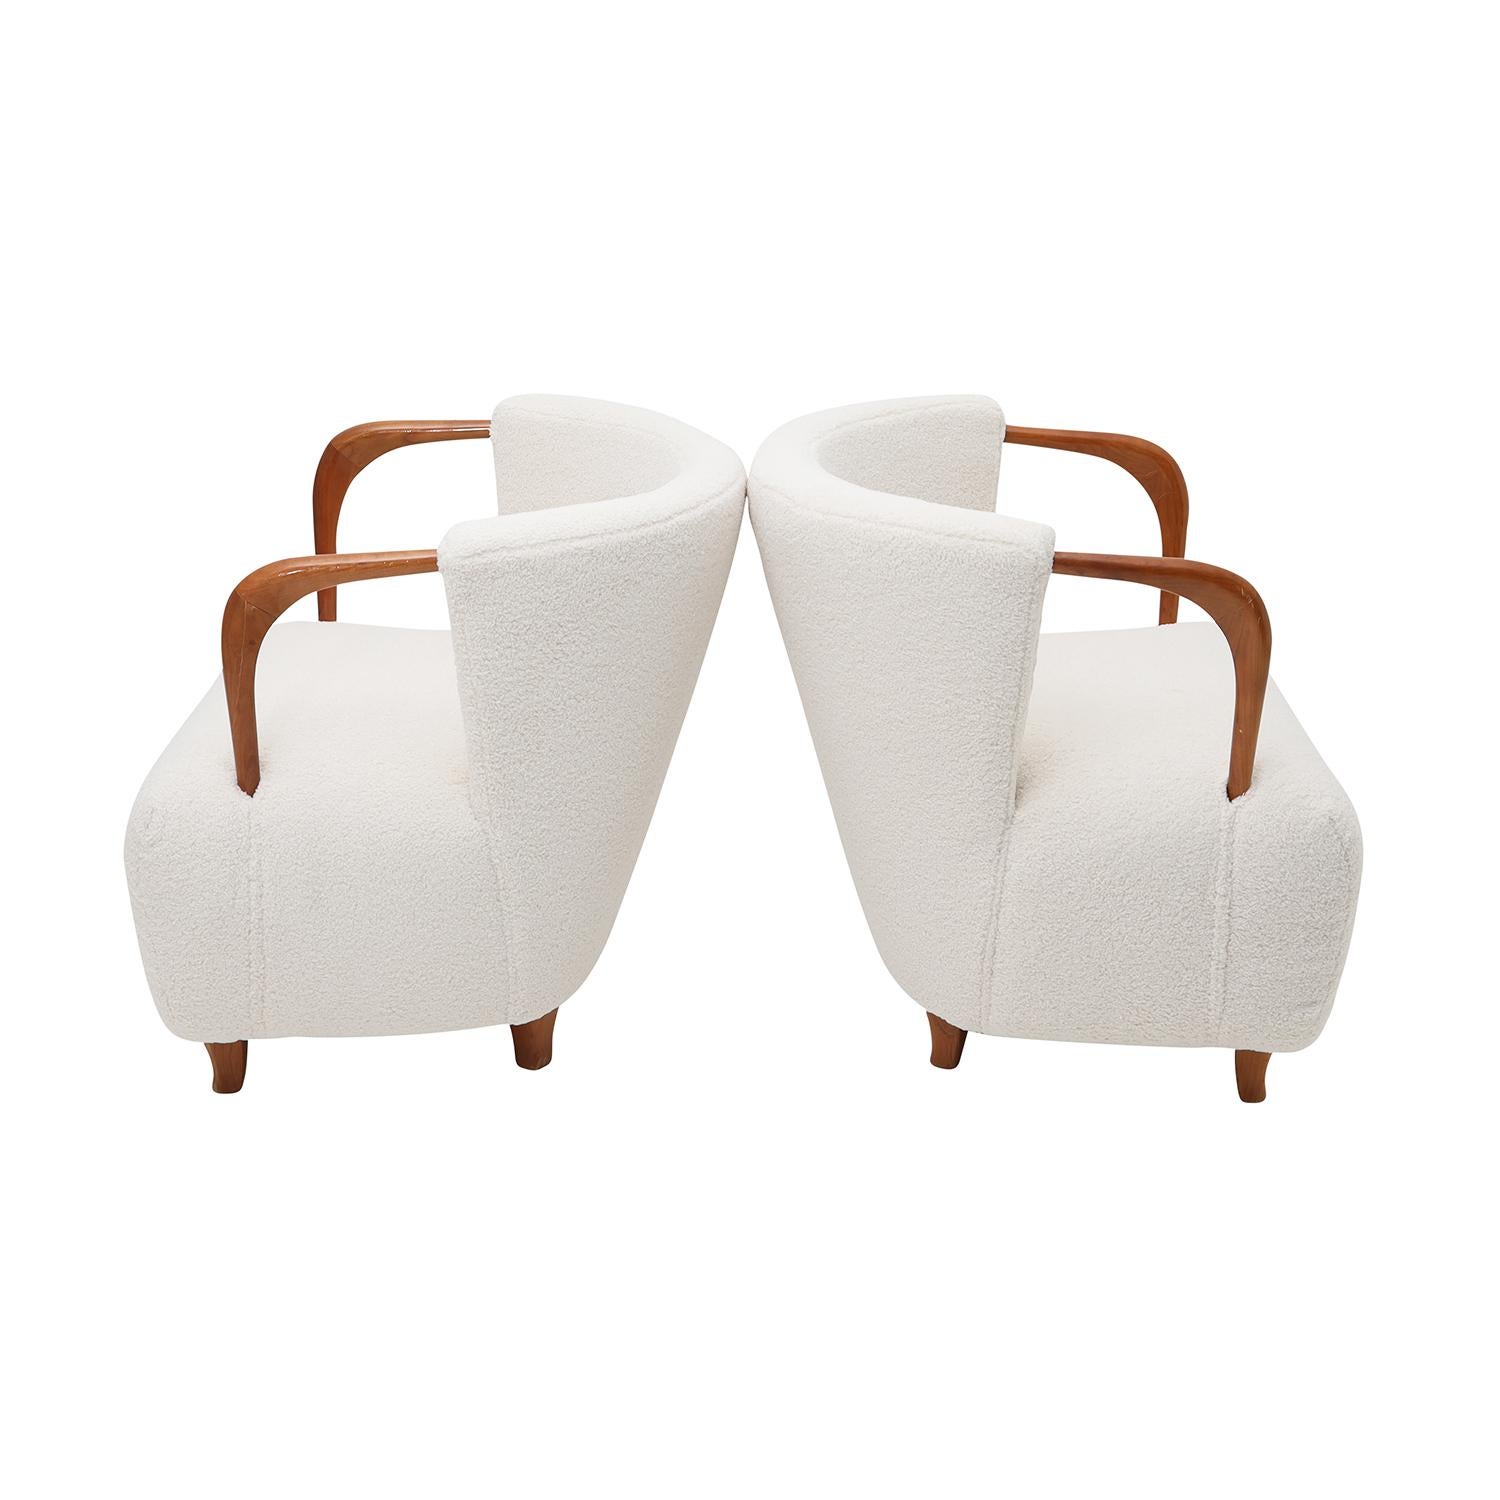 Hand-Carved 20th Century White Italian Pair of Walnut Club Chairs Attributed to Giorgetti